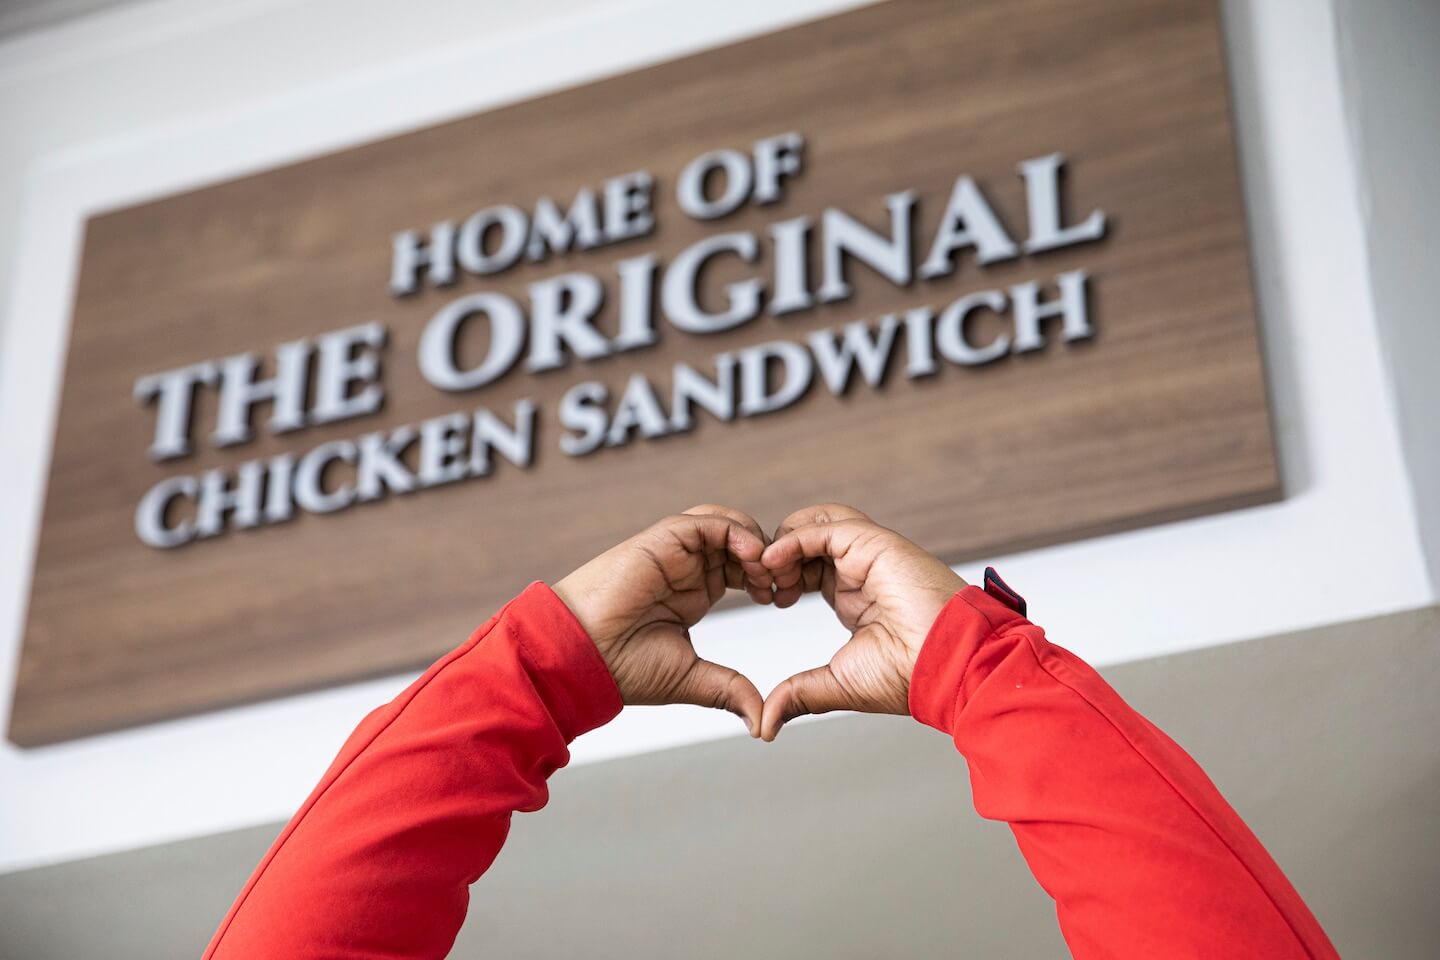 Person making heart shape with hands in front of Chick-fil-A sign